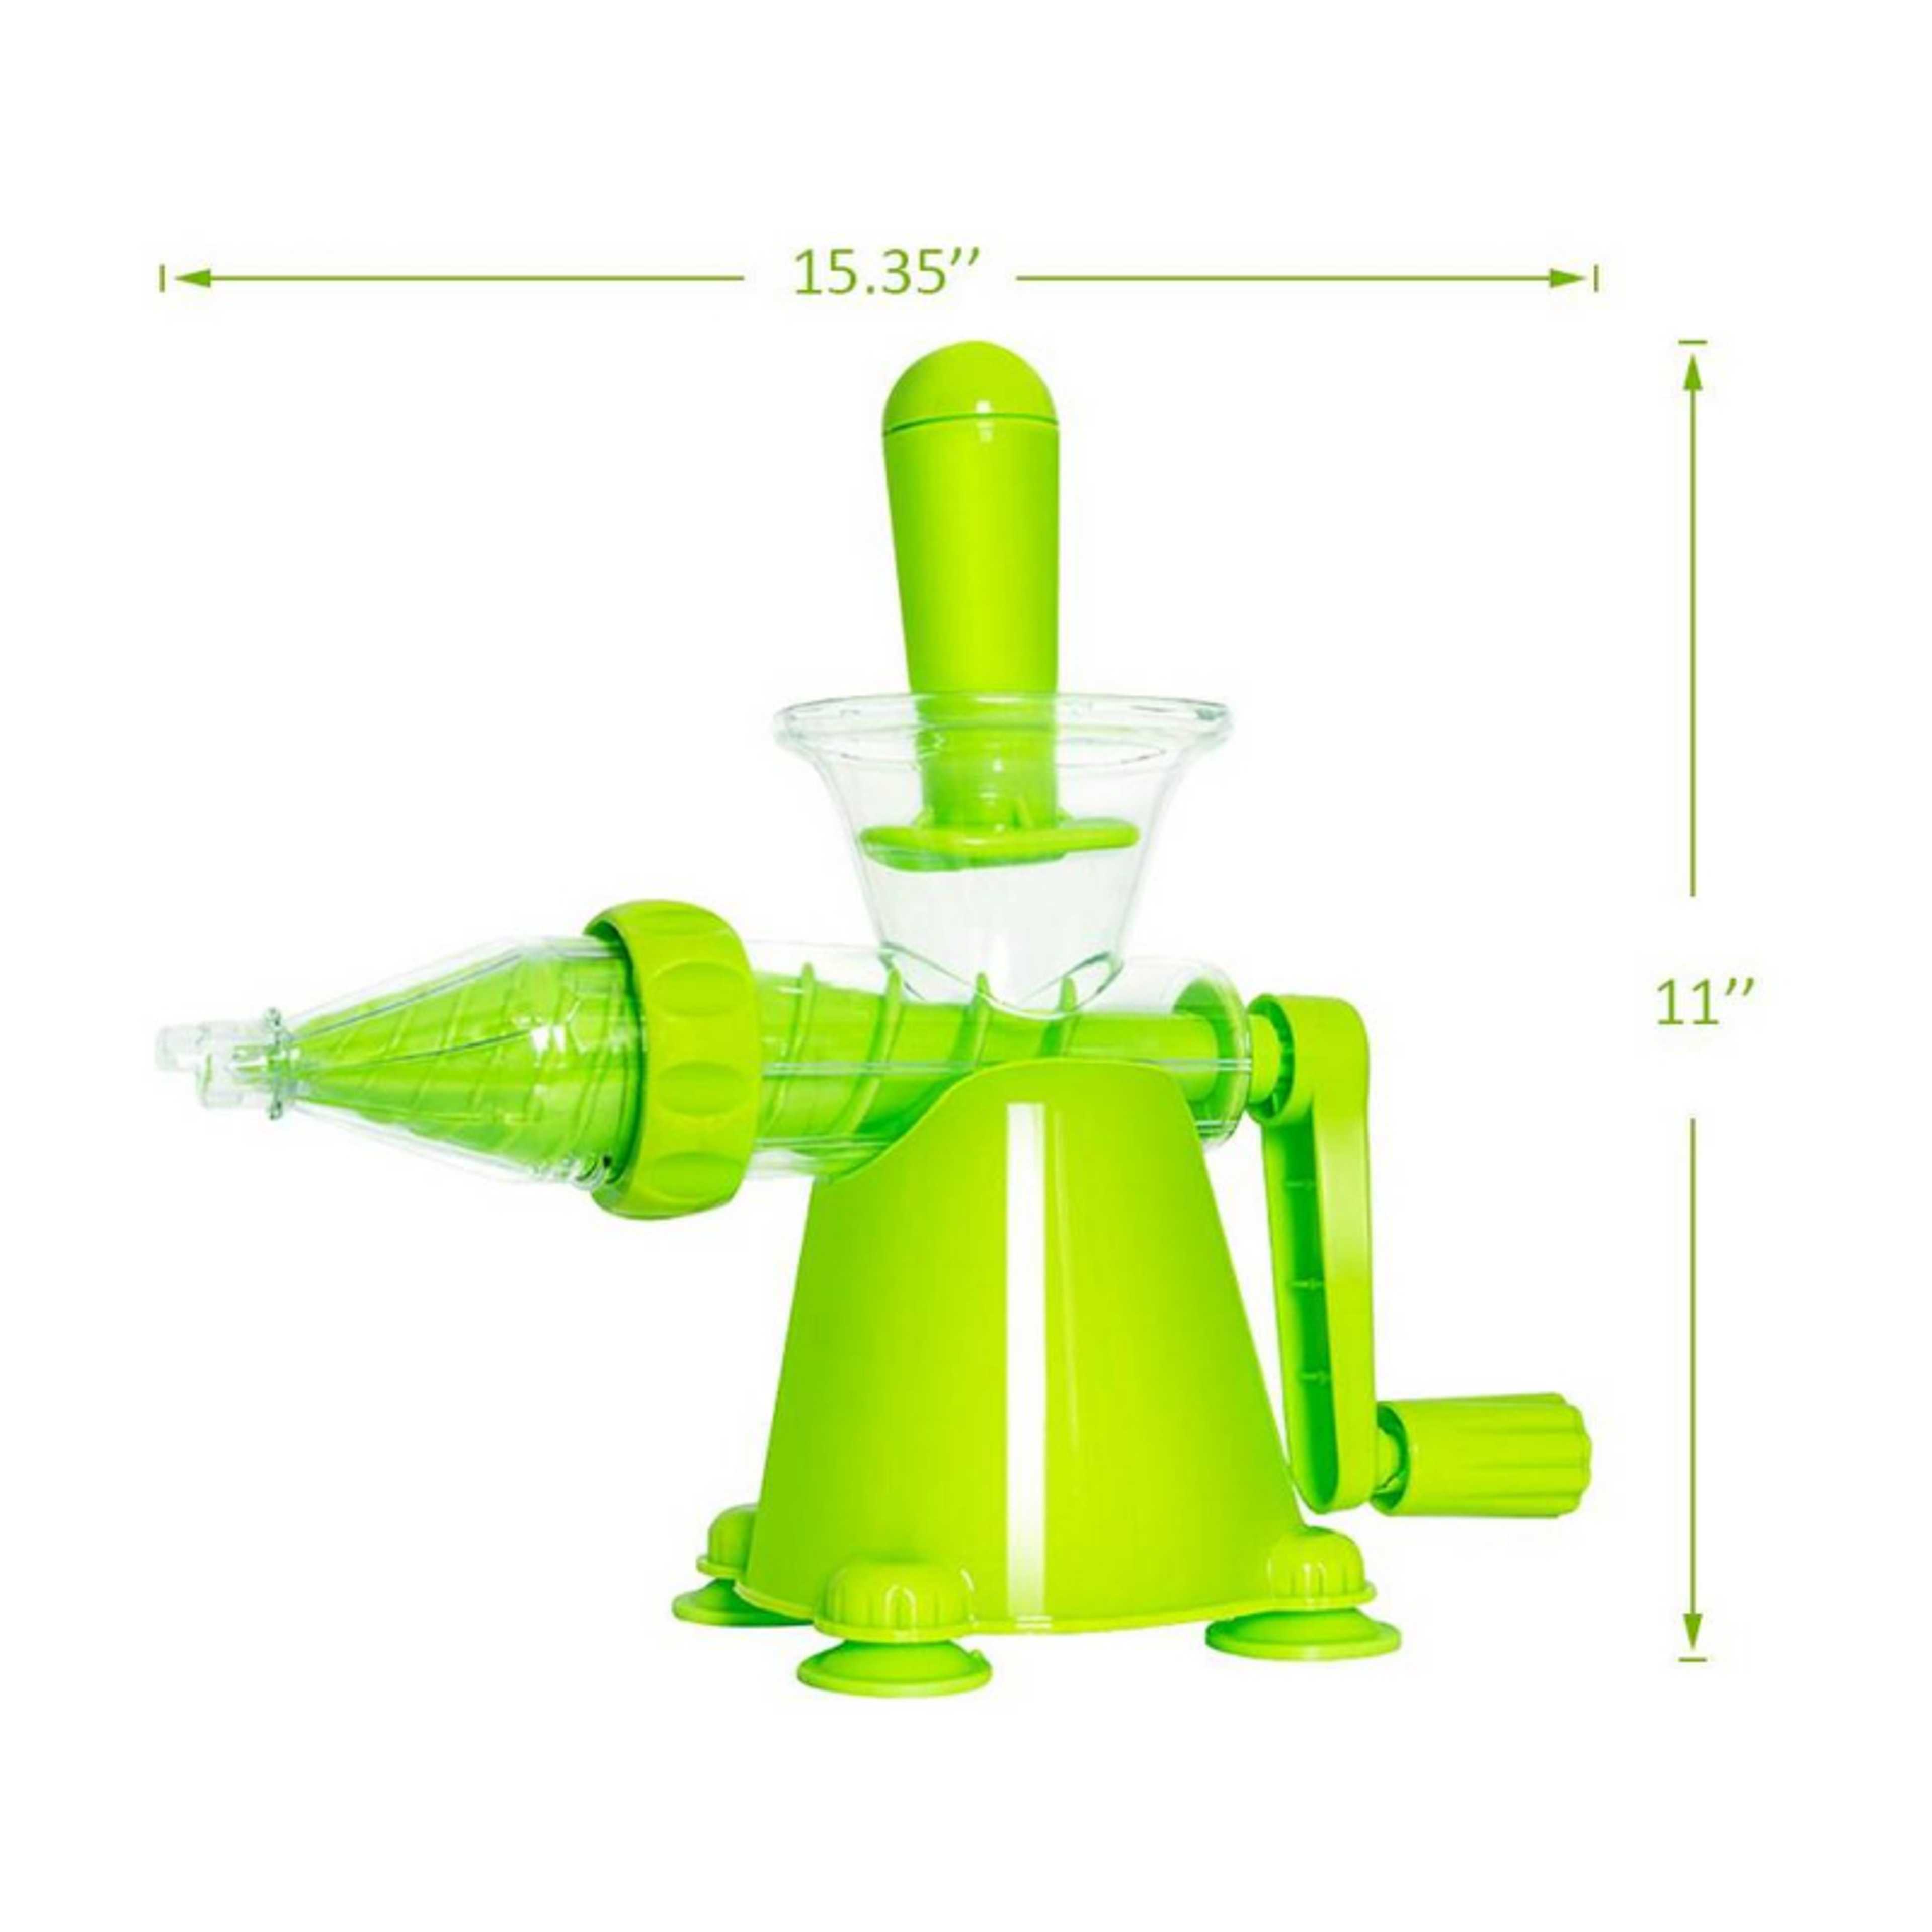 Multifunction Manual Hand Juicer Fruit Vegetable Extractor Portable DIY Kitchen Tools With Base